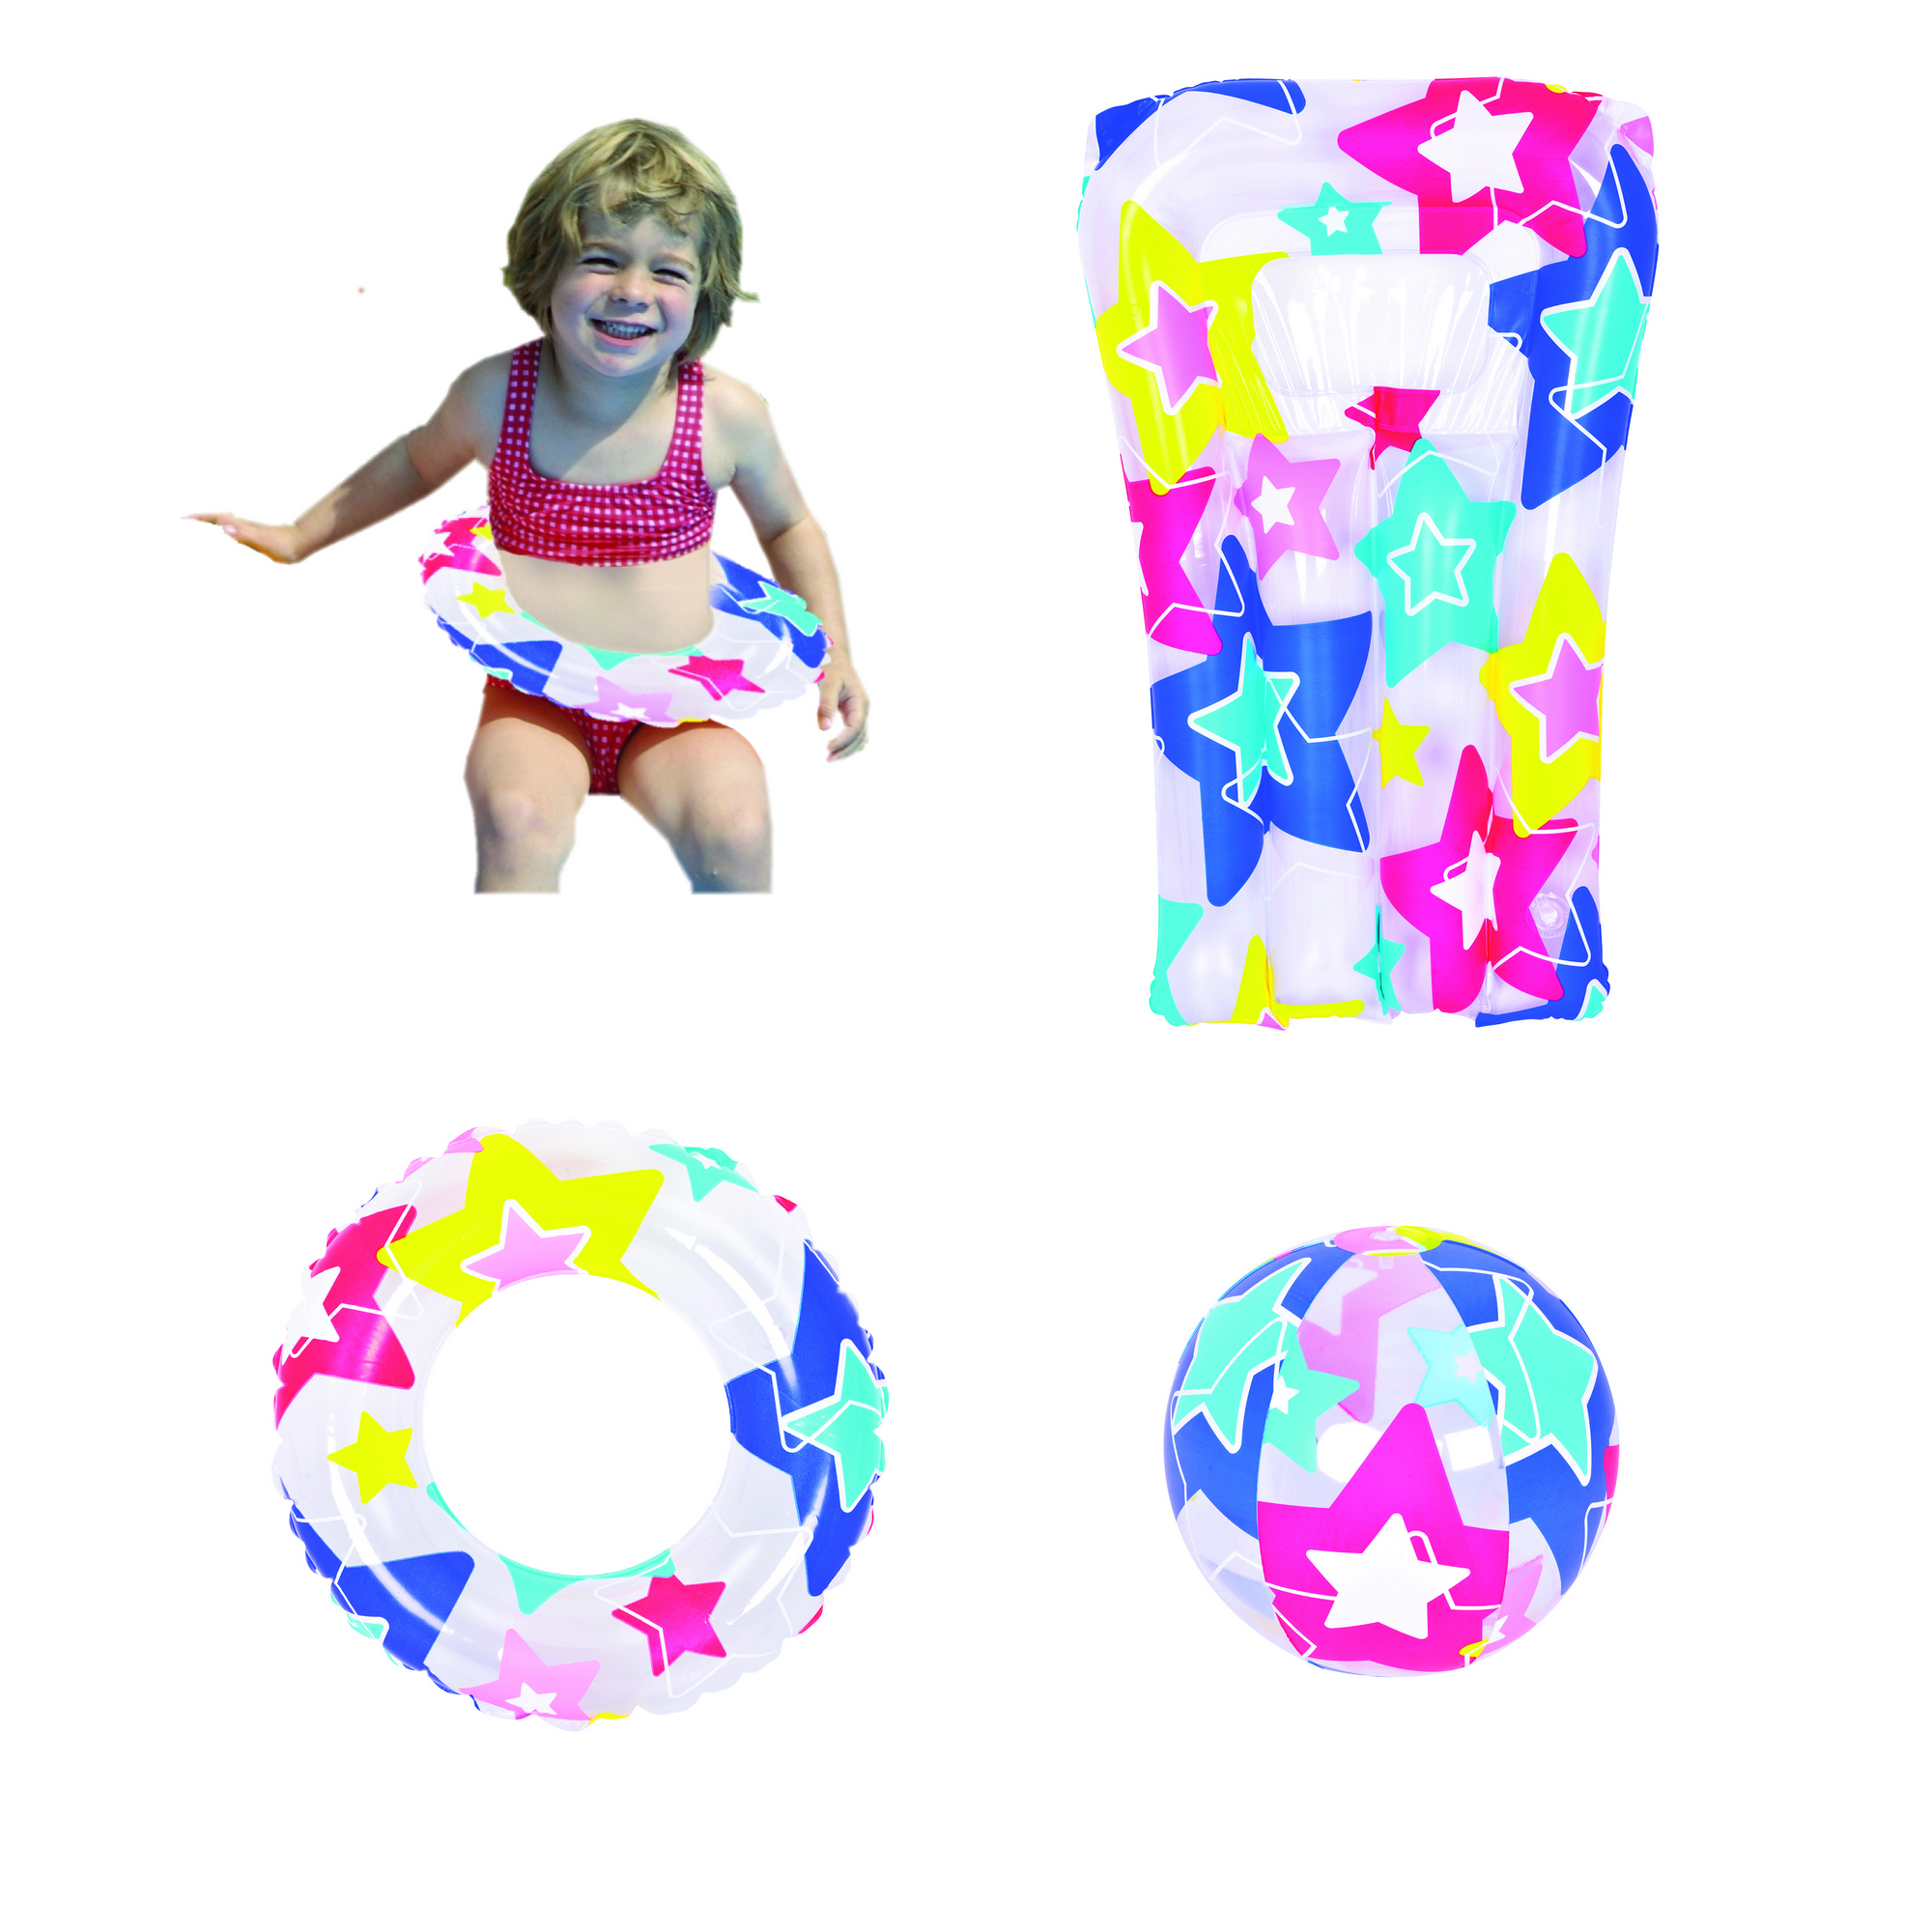 Wasserspielzeug-Set 'Kiddy Beach' + product picture